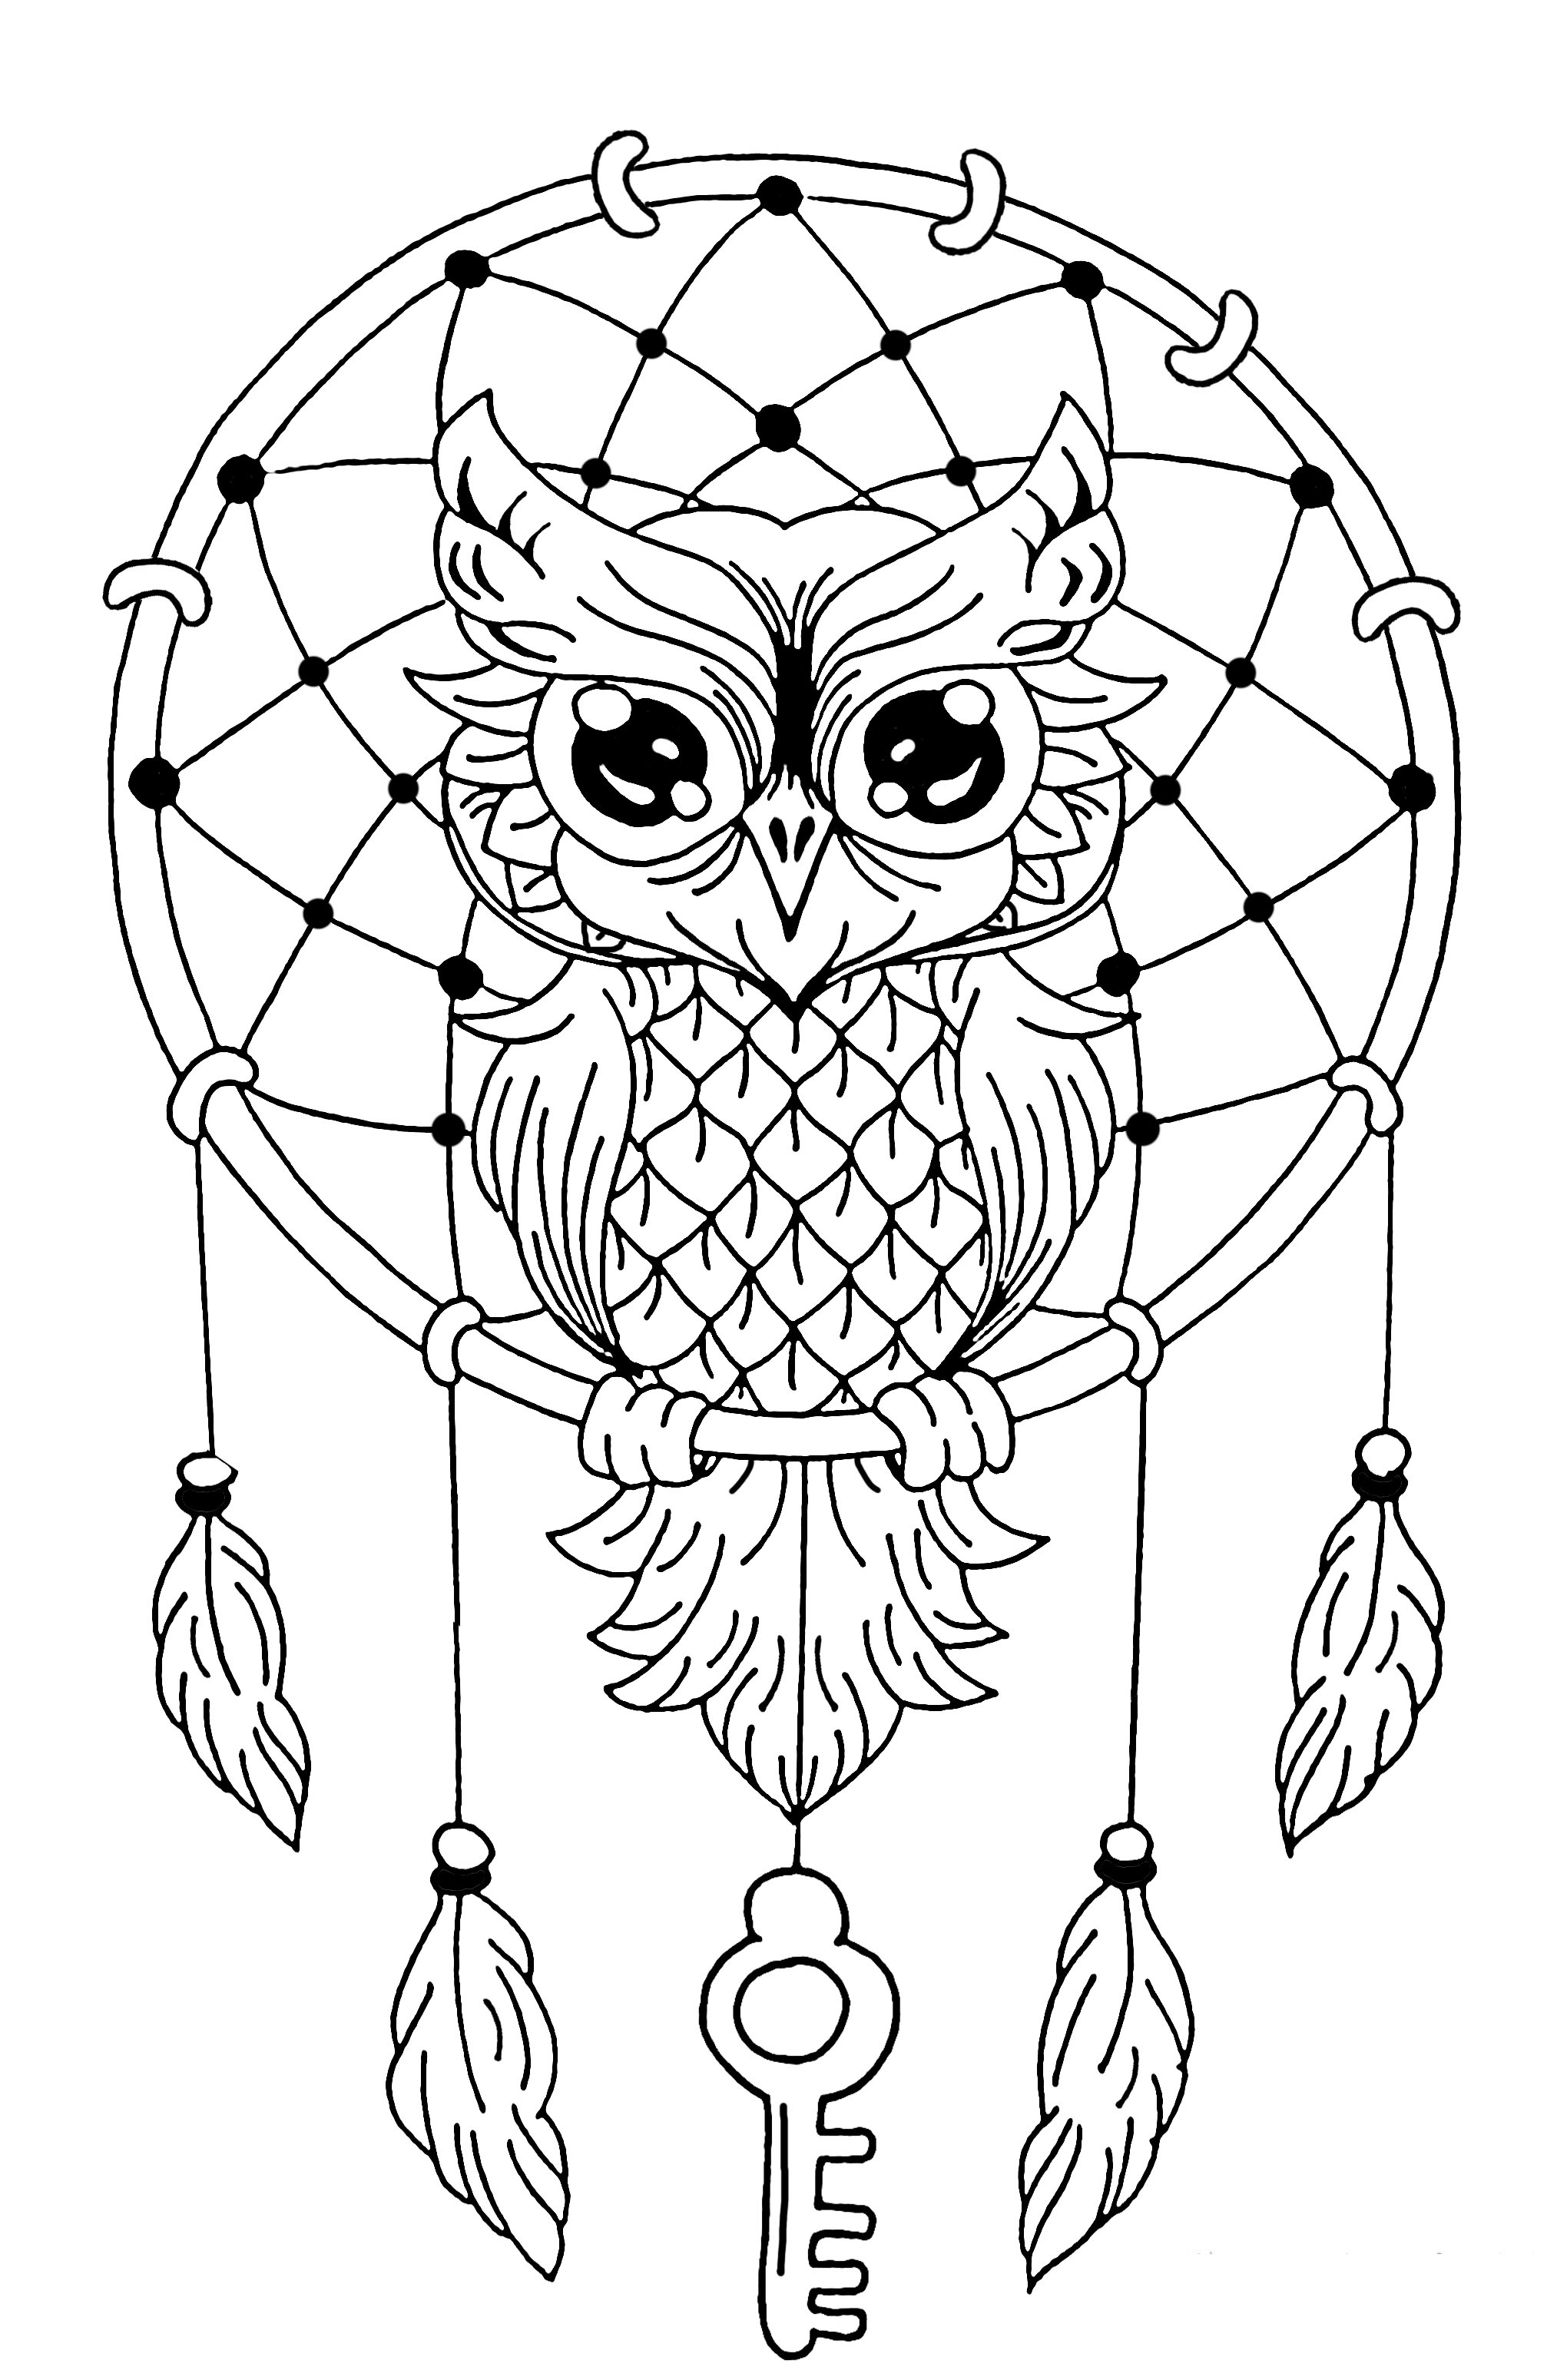 Dream Catcher Coloring Pages - Best Coloring Pages For Kids